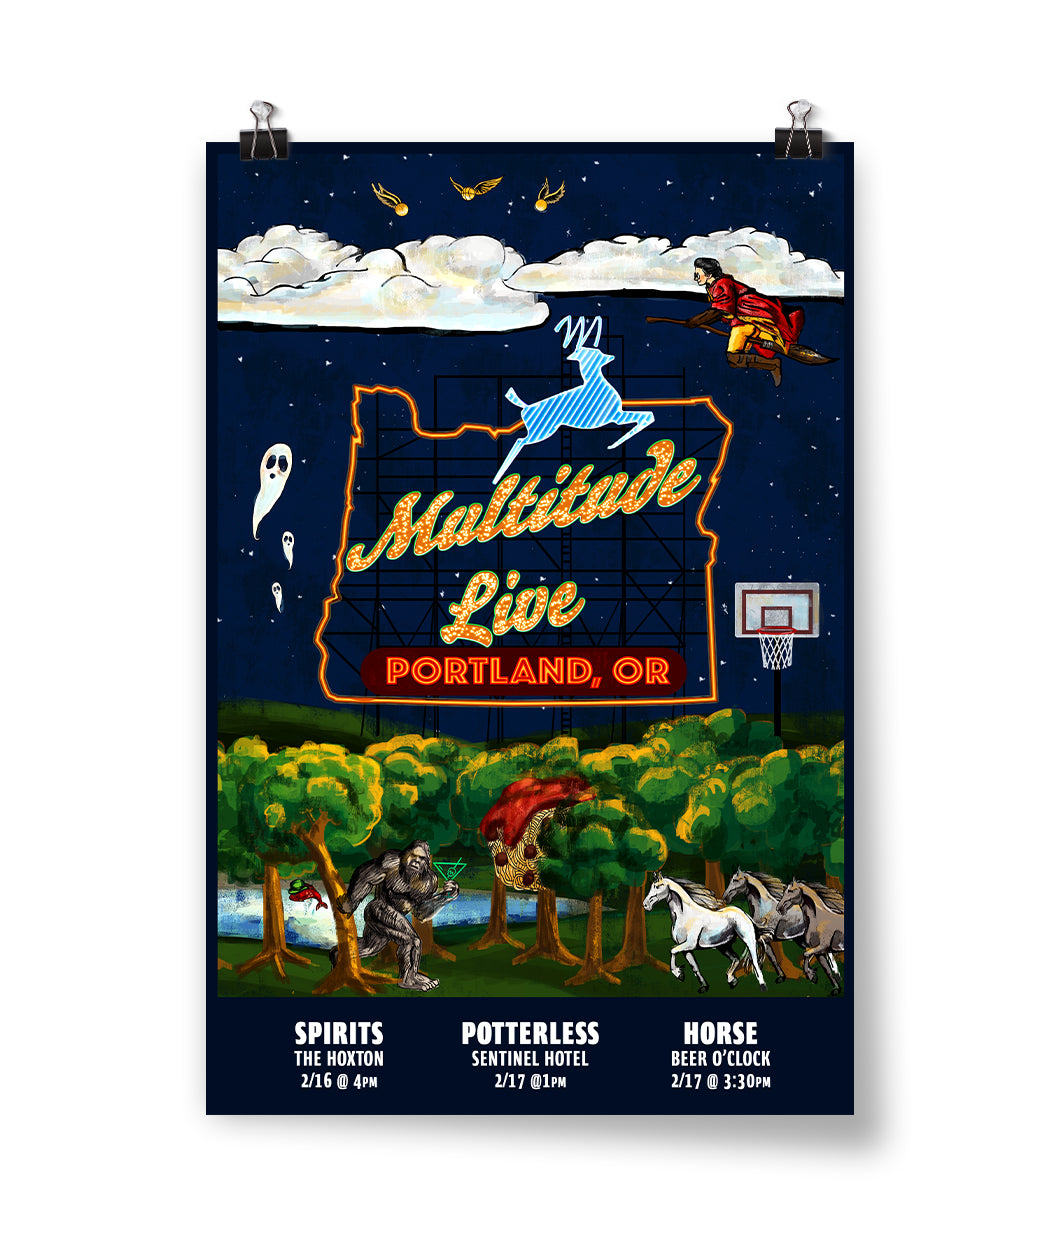 A poster that says "Multitude Live; Portland, OR" in a the middle of the outline of the state of Washington. In the sky is clouds, ghosts, snitches and Harry Potter on a broomstick. Below is a forest filled with horses and a creature holding the Spirits logo. At the very bottom are dates and locations listed for Spirits, Potterless and Horse.